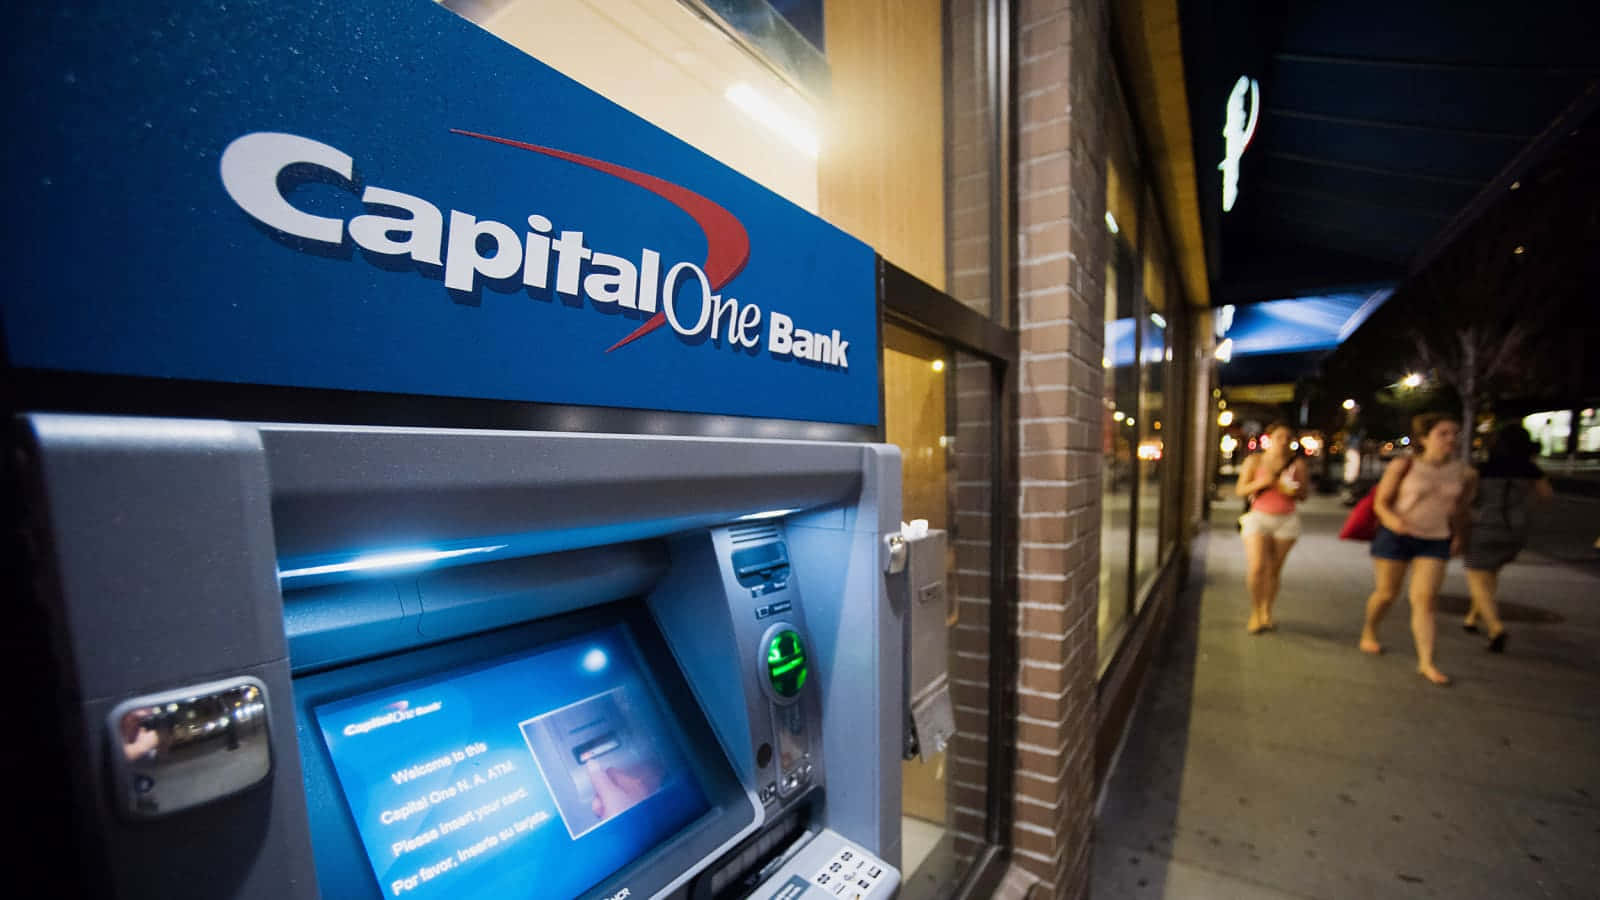 Capital One Atm At Night Background